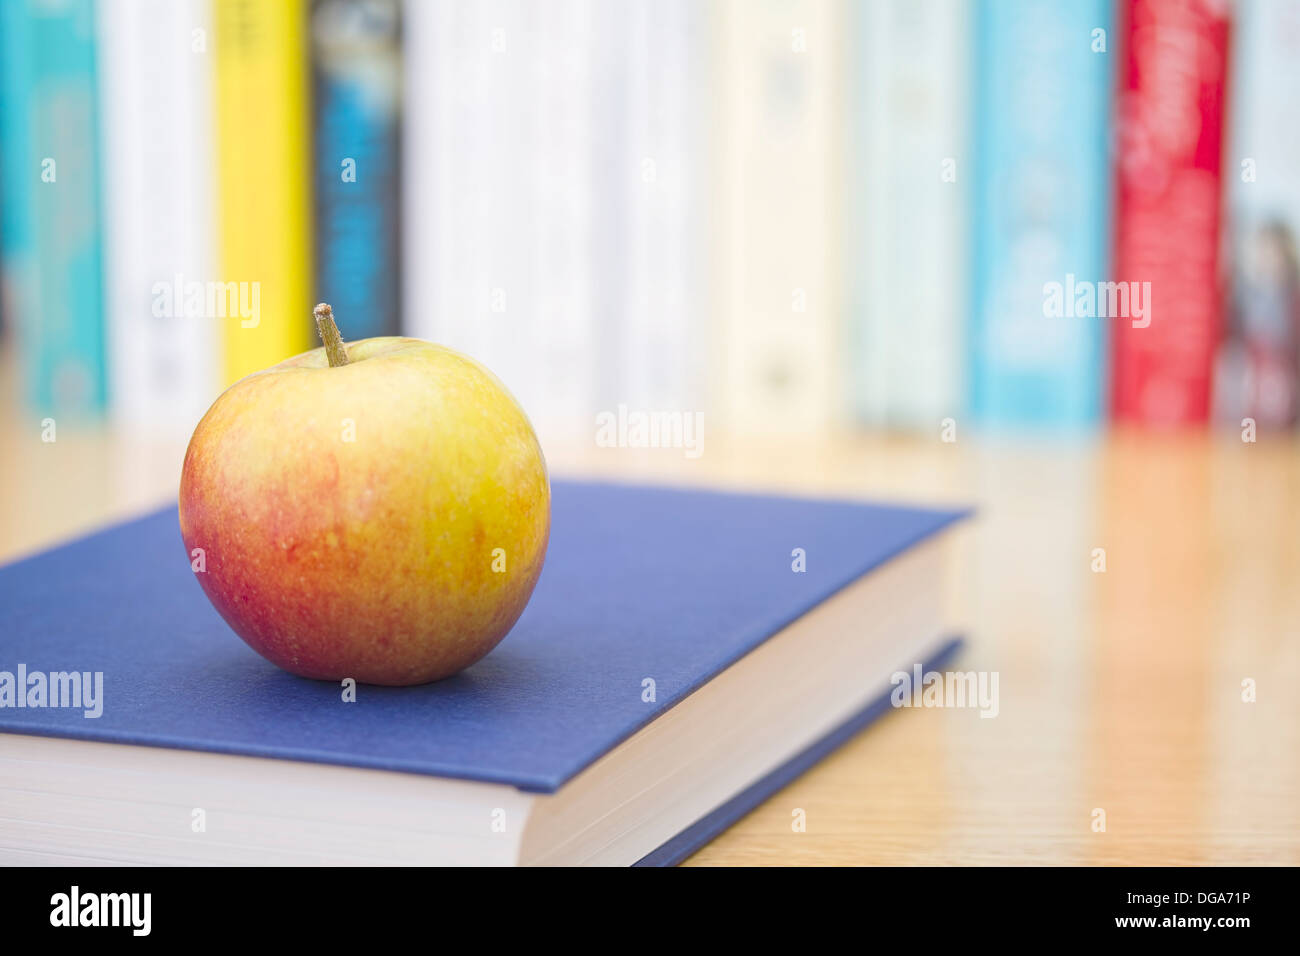 Book with ripe apple a nd row of books in background Stock Photo